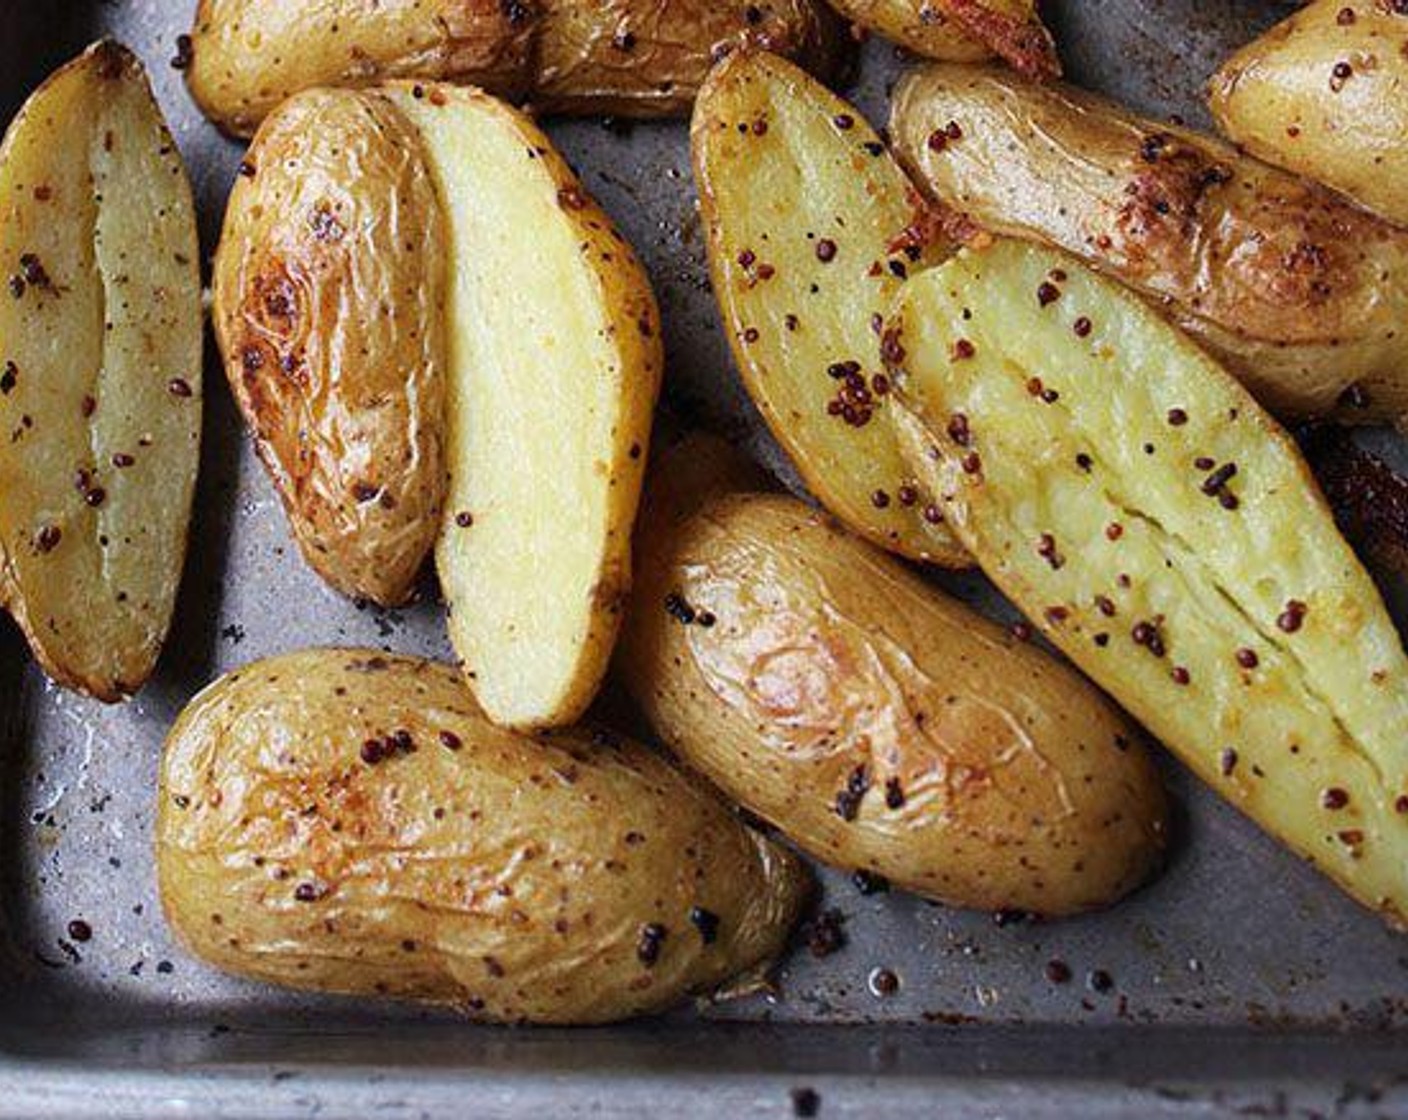 step 2 Cut the Fingerling Potatoes (6 cups) in half lengthwise and place them on a sheet pan. Add Extra-Virgin Olive Oil (2 Tbsp), Kosher Salt (1 tsp), Freshly Ground Black Pepper (1/4 tsp), and the Whole Grain Mustard (2 Tbsp) to the potatoes, and toss well with your hands to coat.